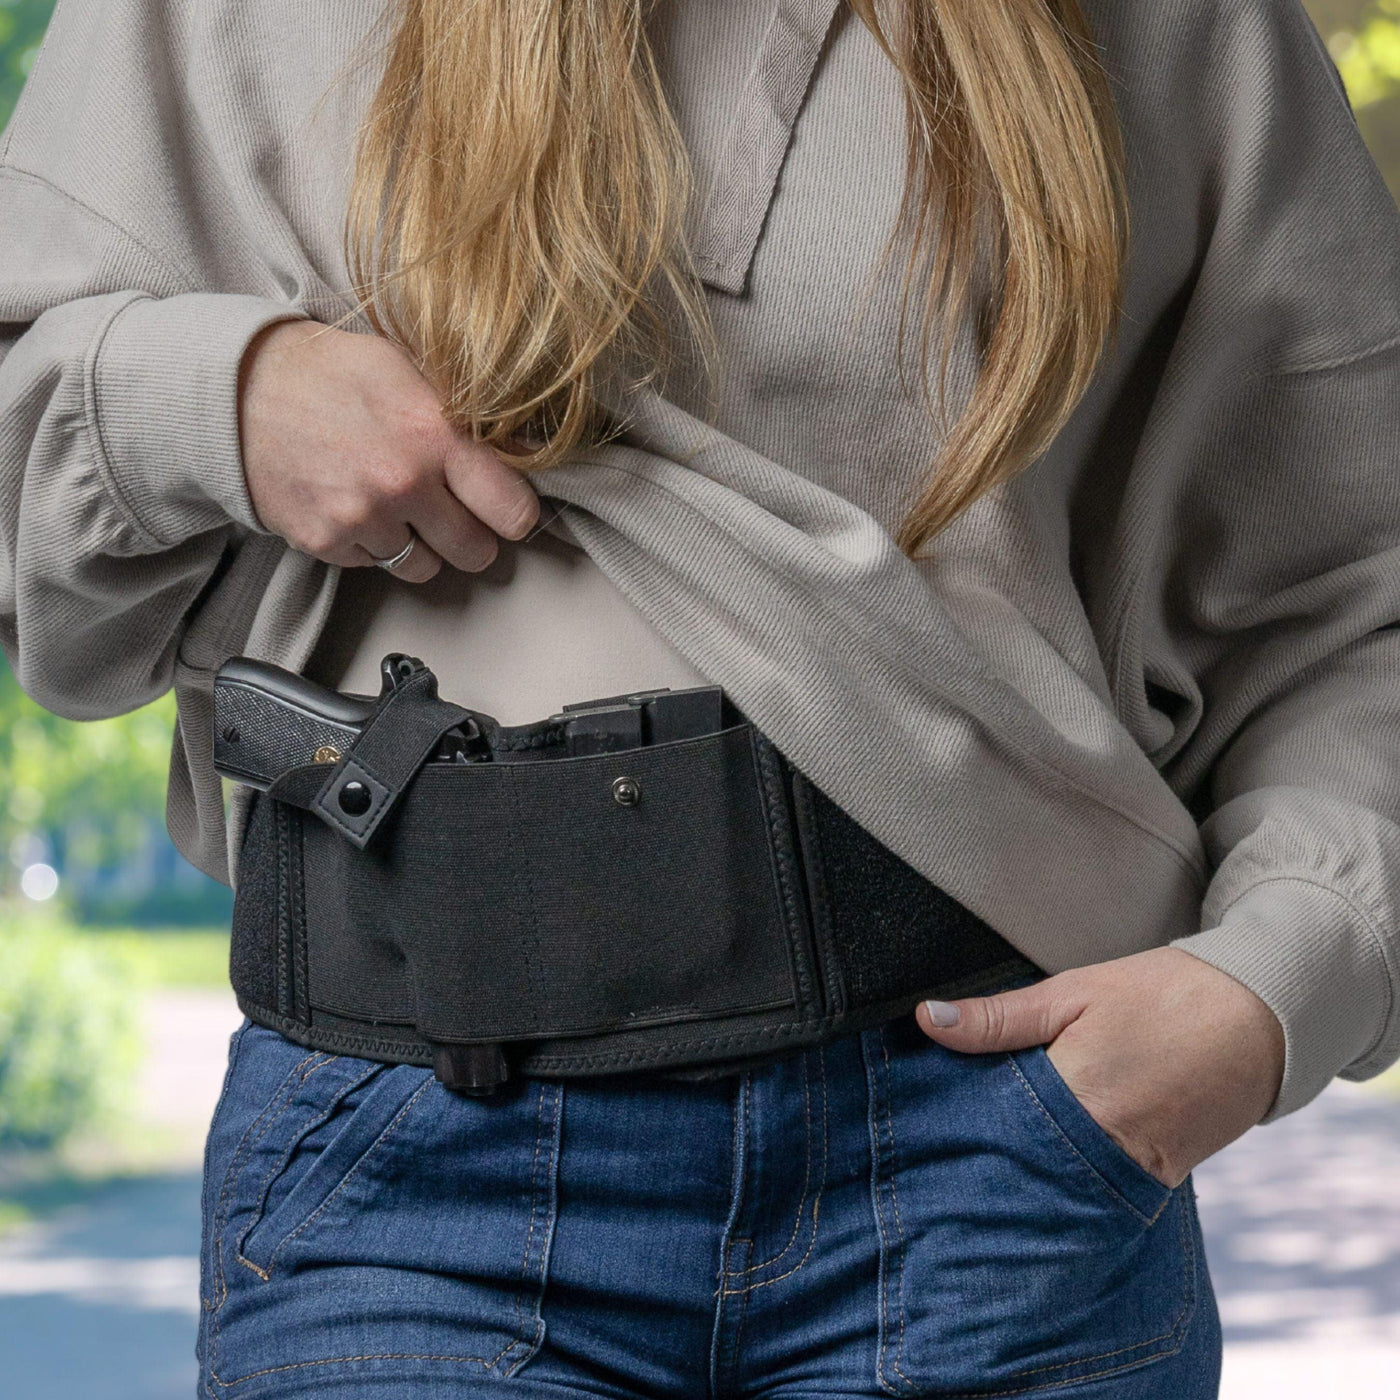 4 Common Types of Concealed Carry Holsters